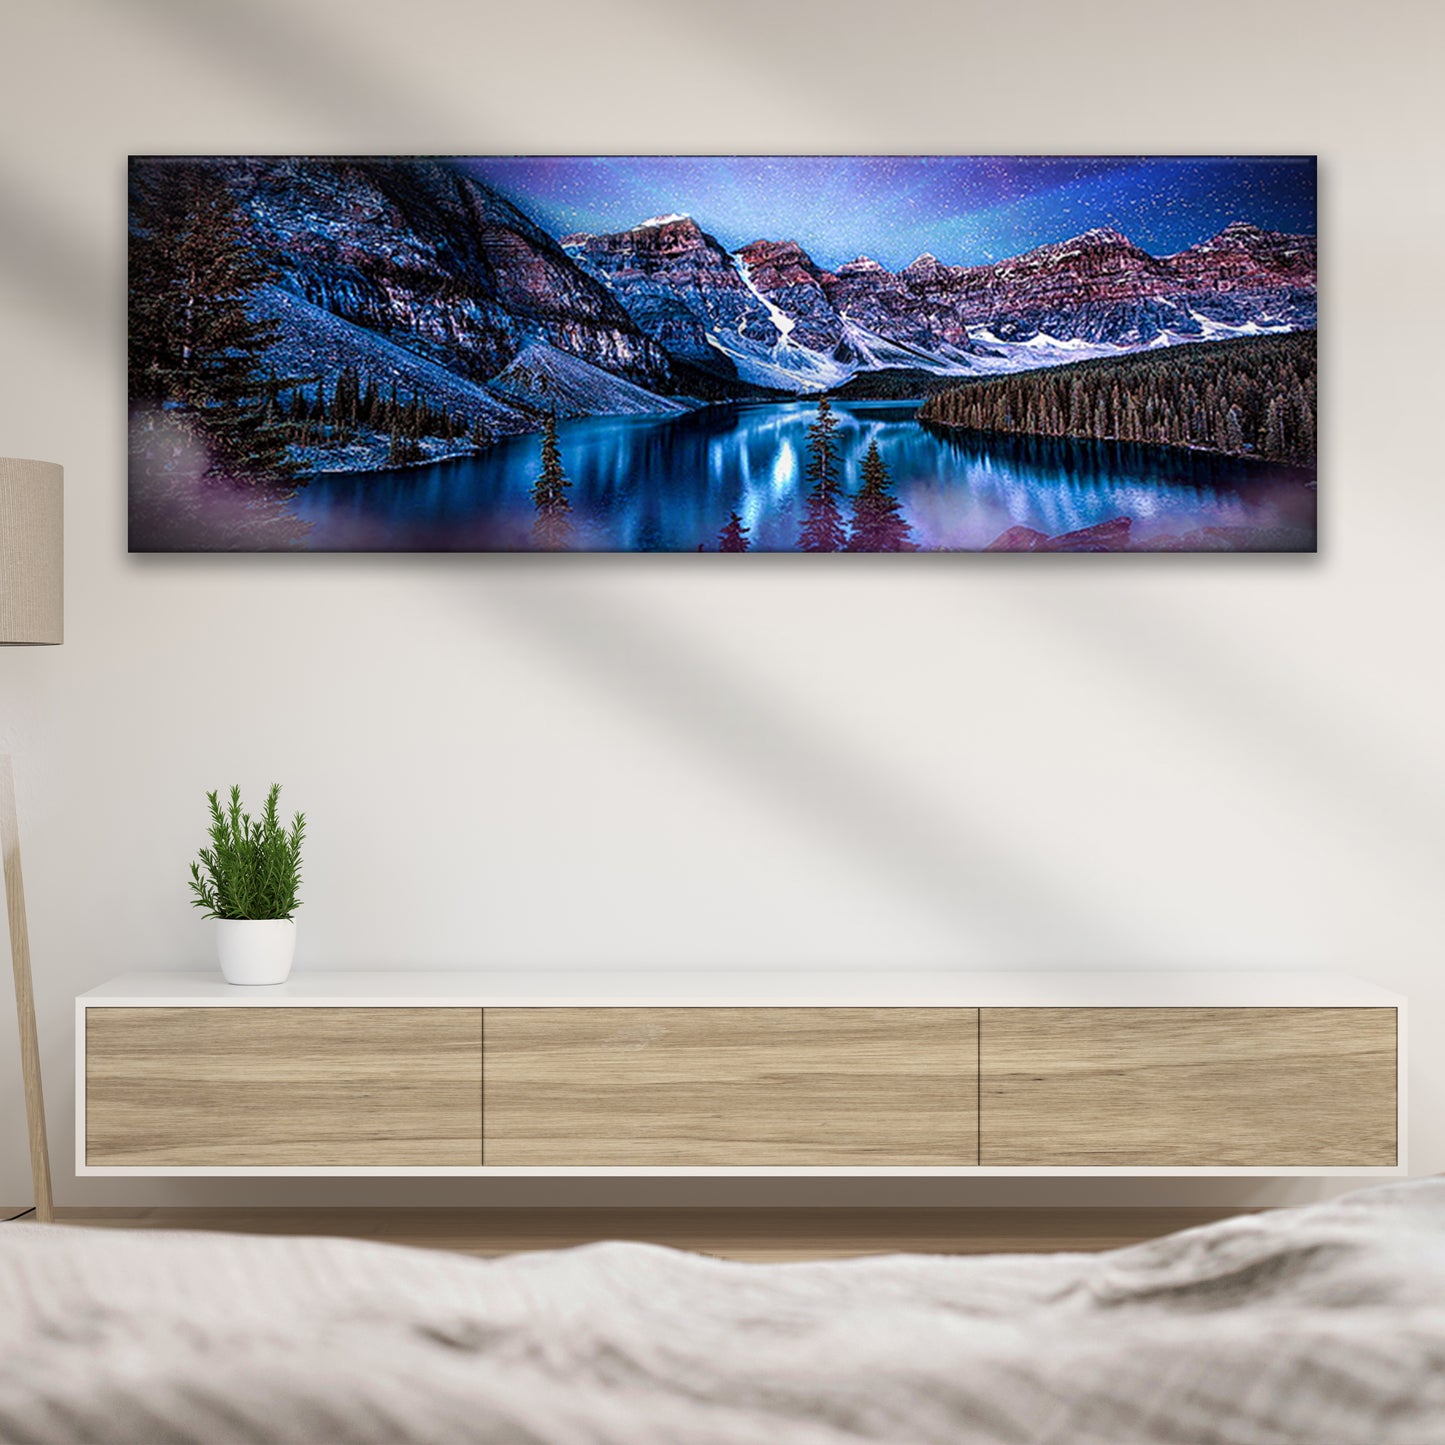 Starry Skies At Moraine Lake Canvas Wall Art - Image by Tailored Canvases